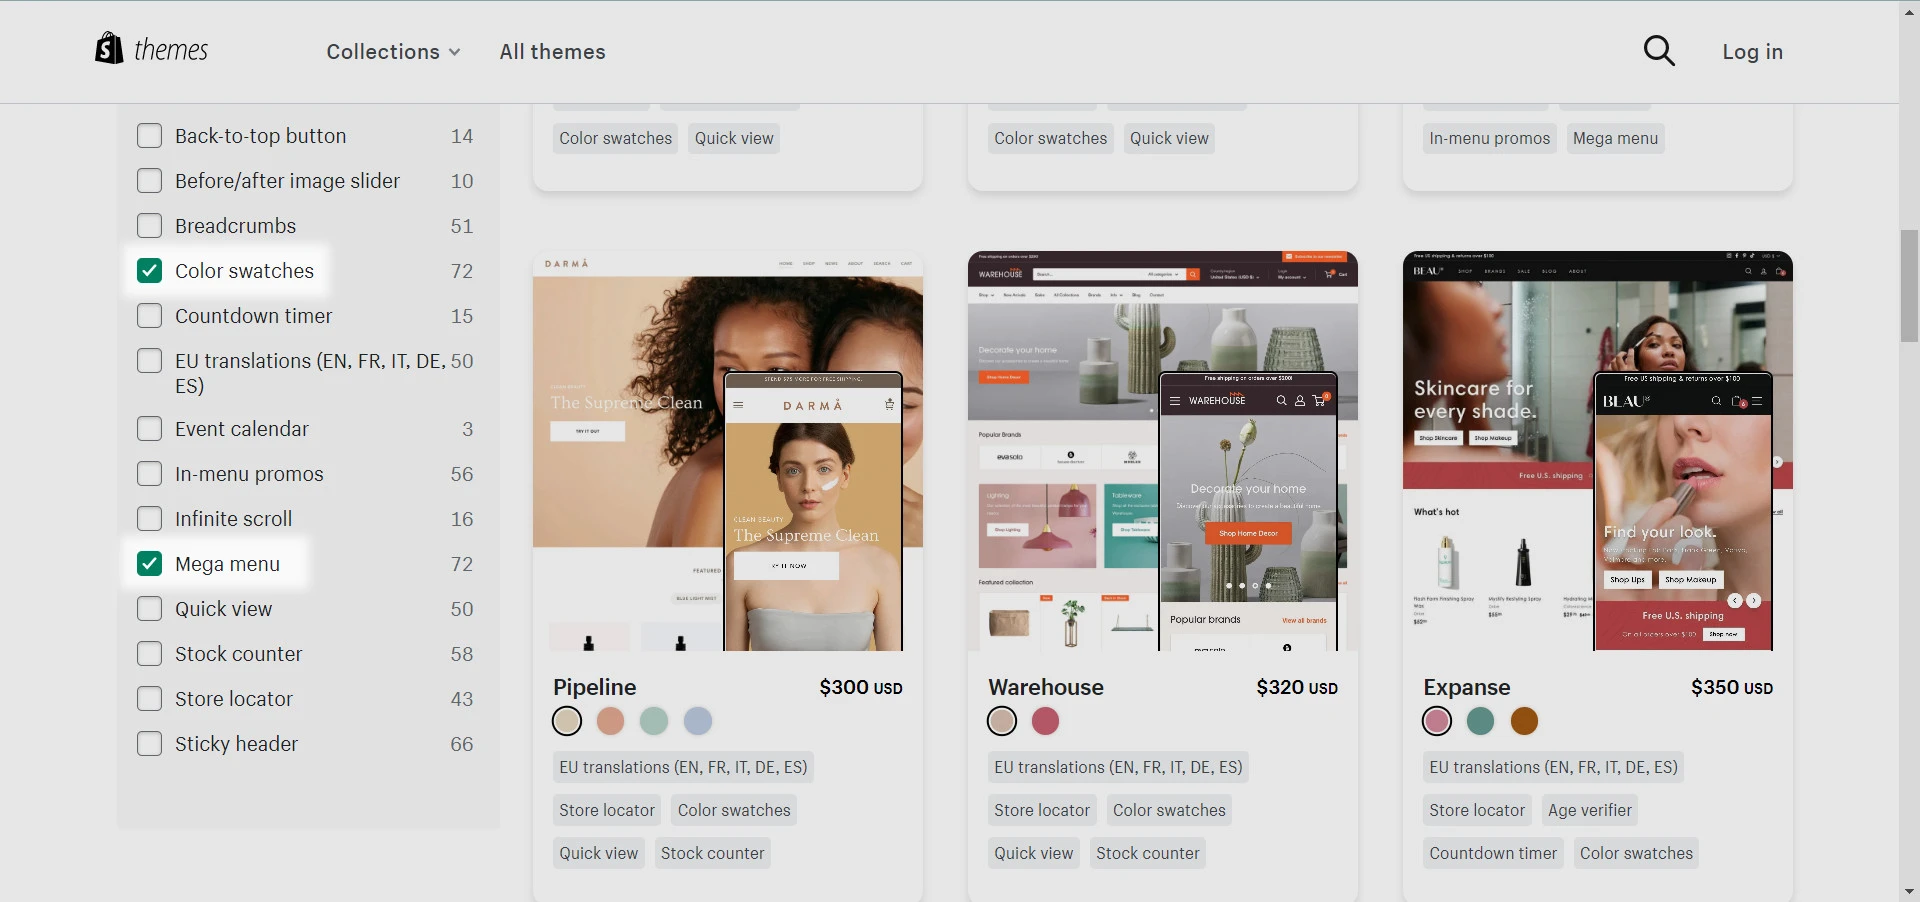 Narrow down your choices with Shopify Theme Store’s handy filter